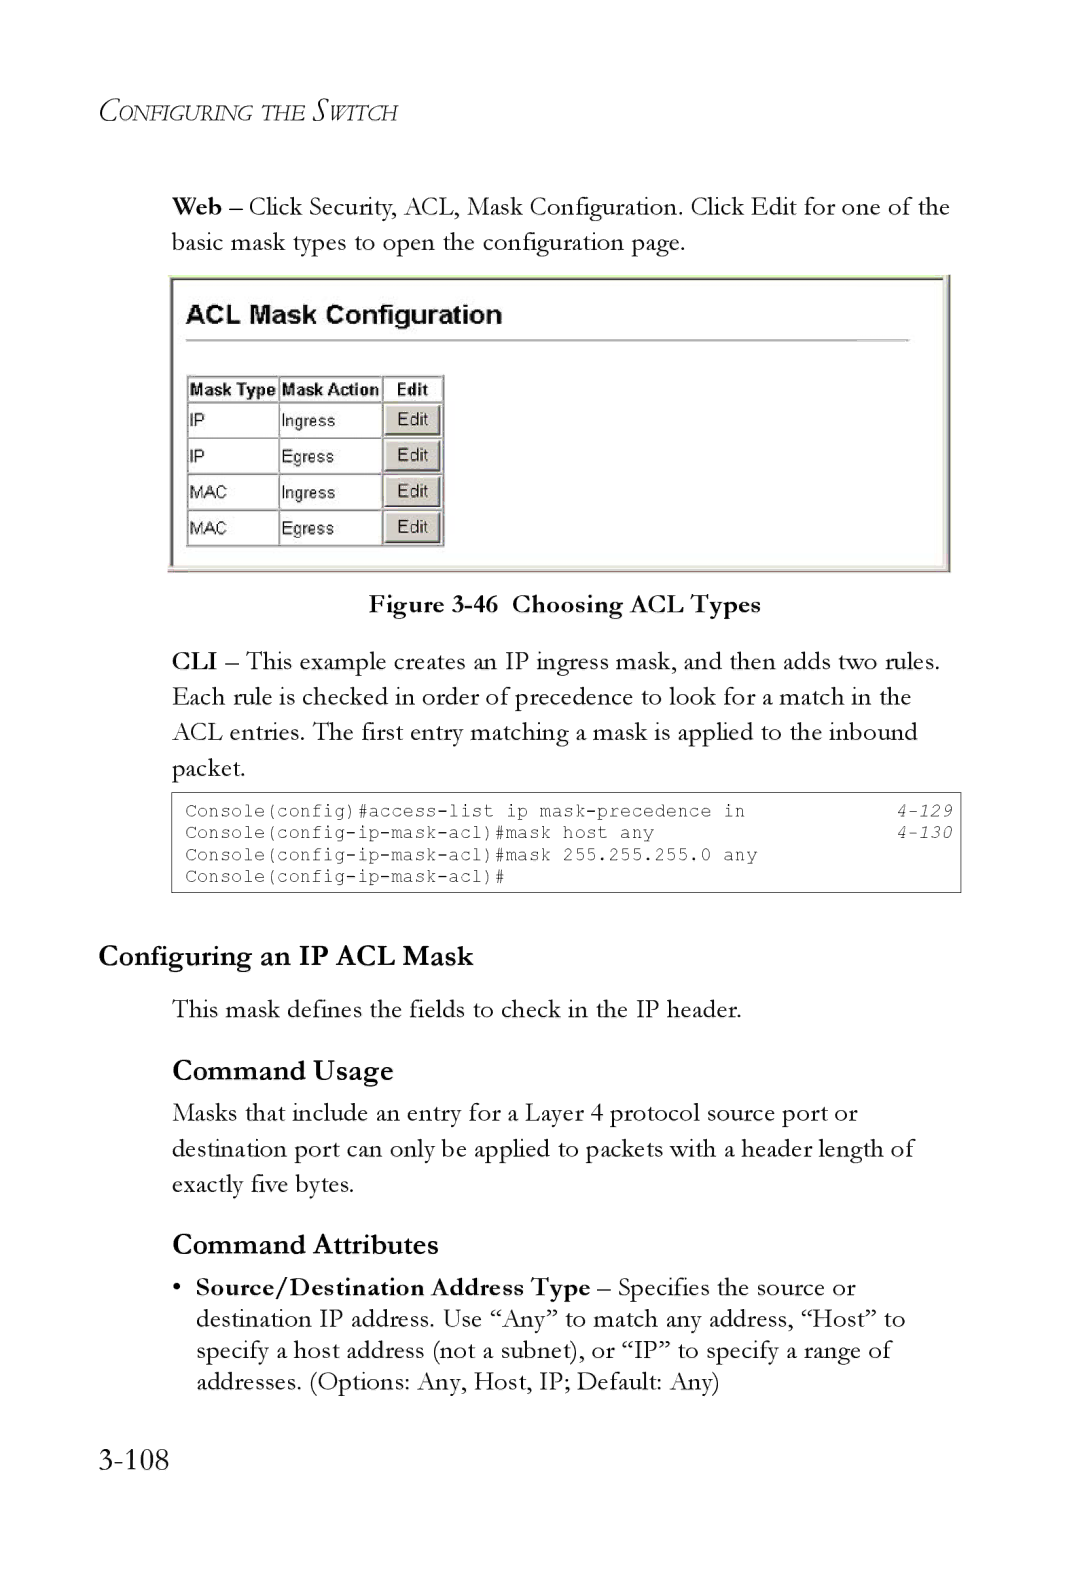 SMC Networks SMC6824M manual 108, Configuring an IP ACL Mask, This mask defines the fields to check in the IP header 